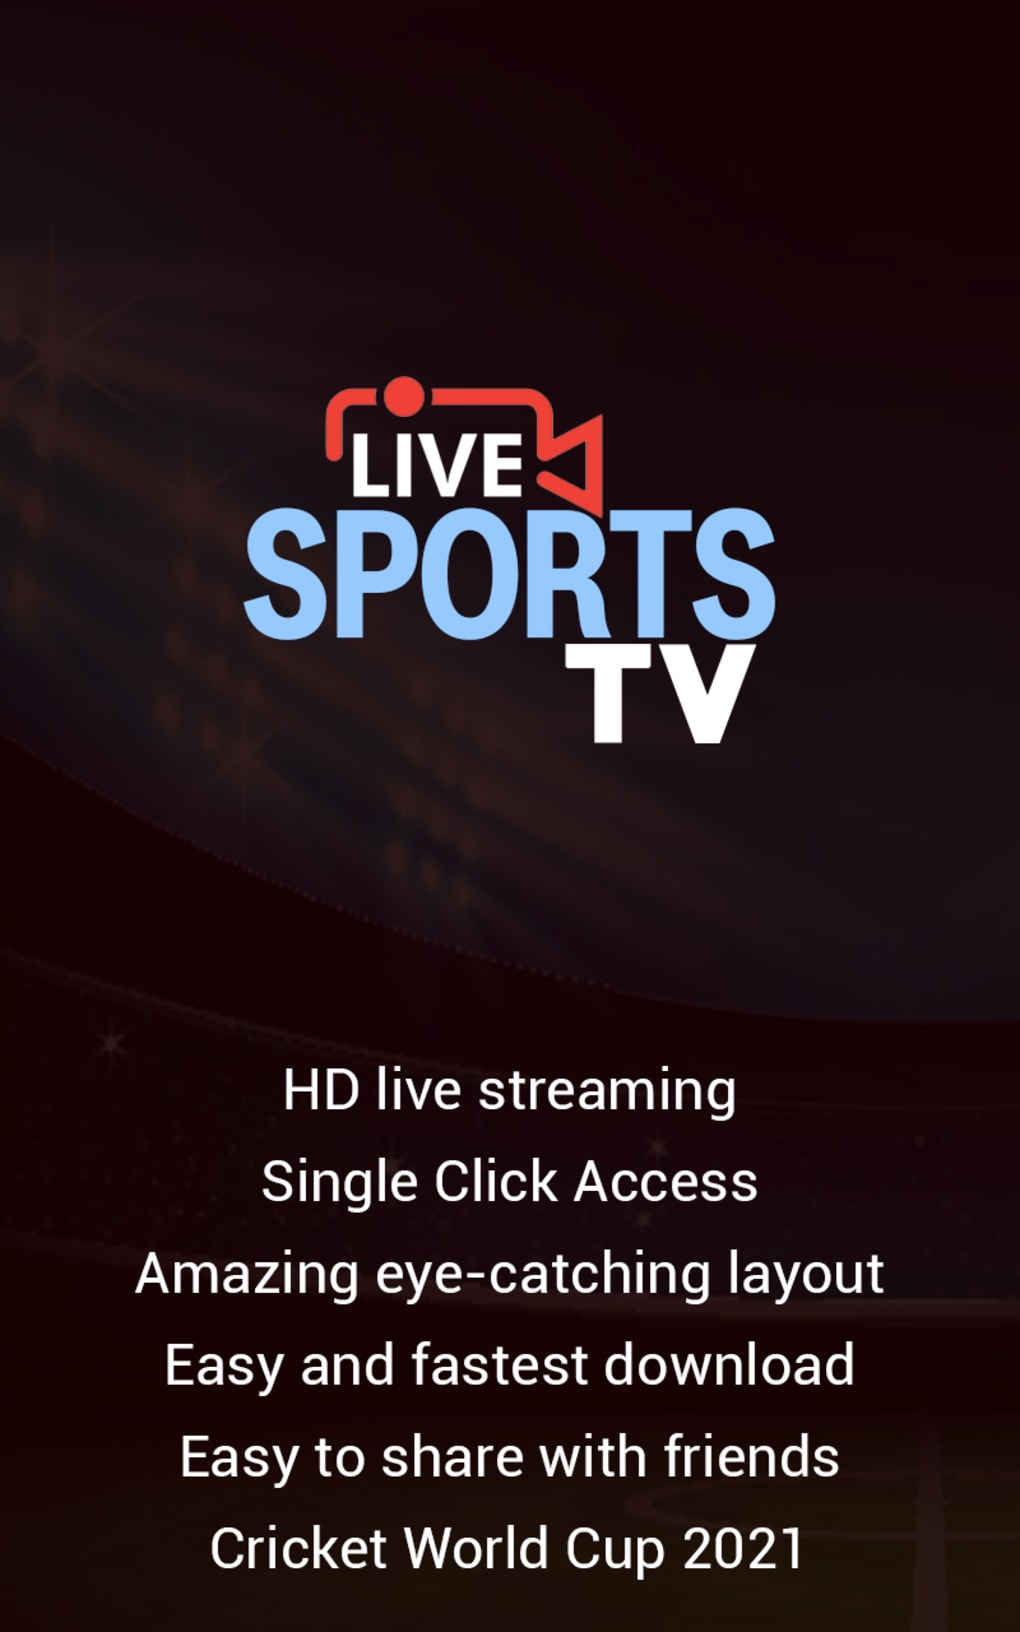 live rugby streaming app